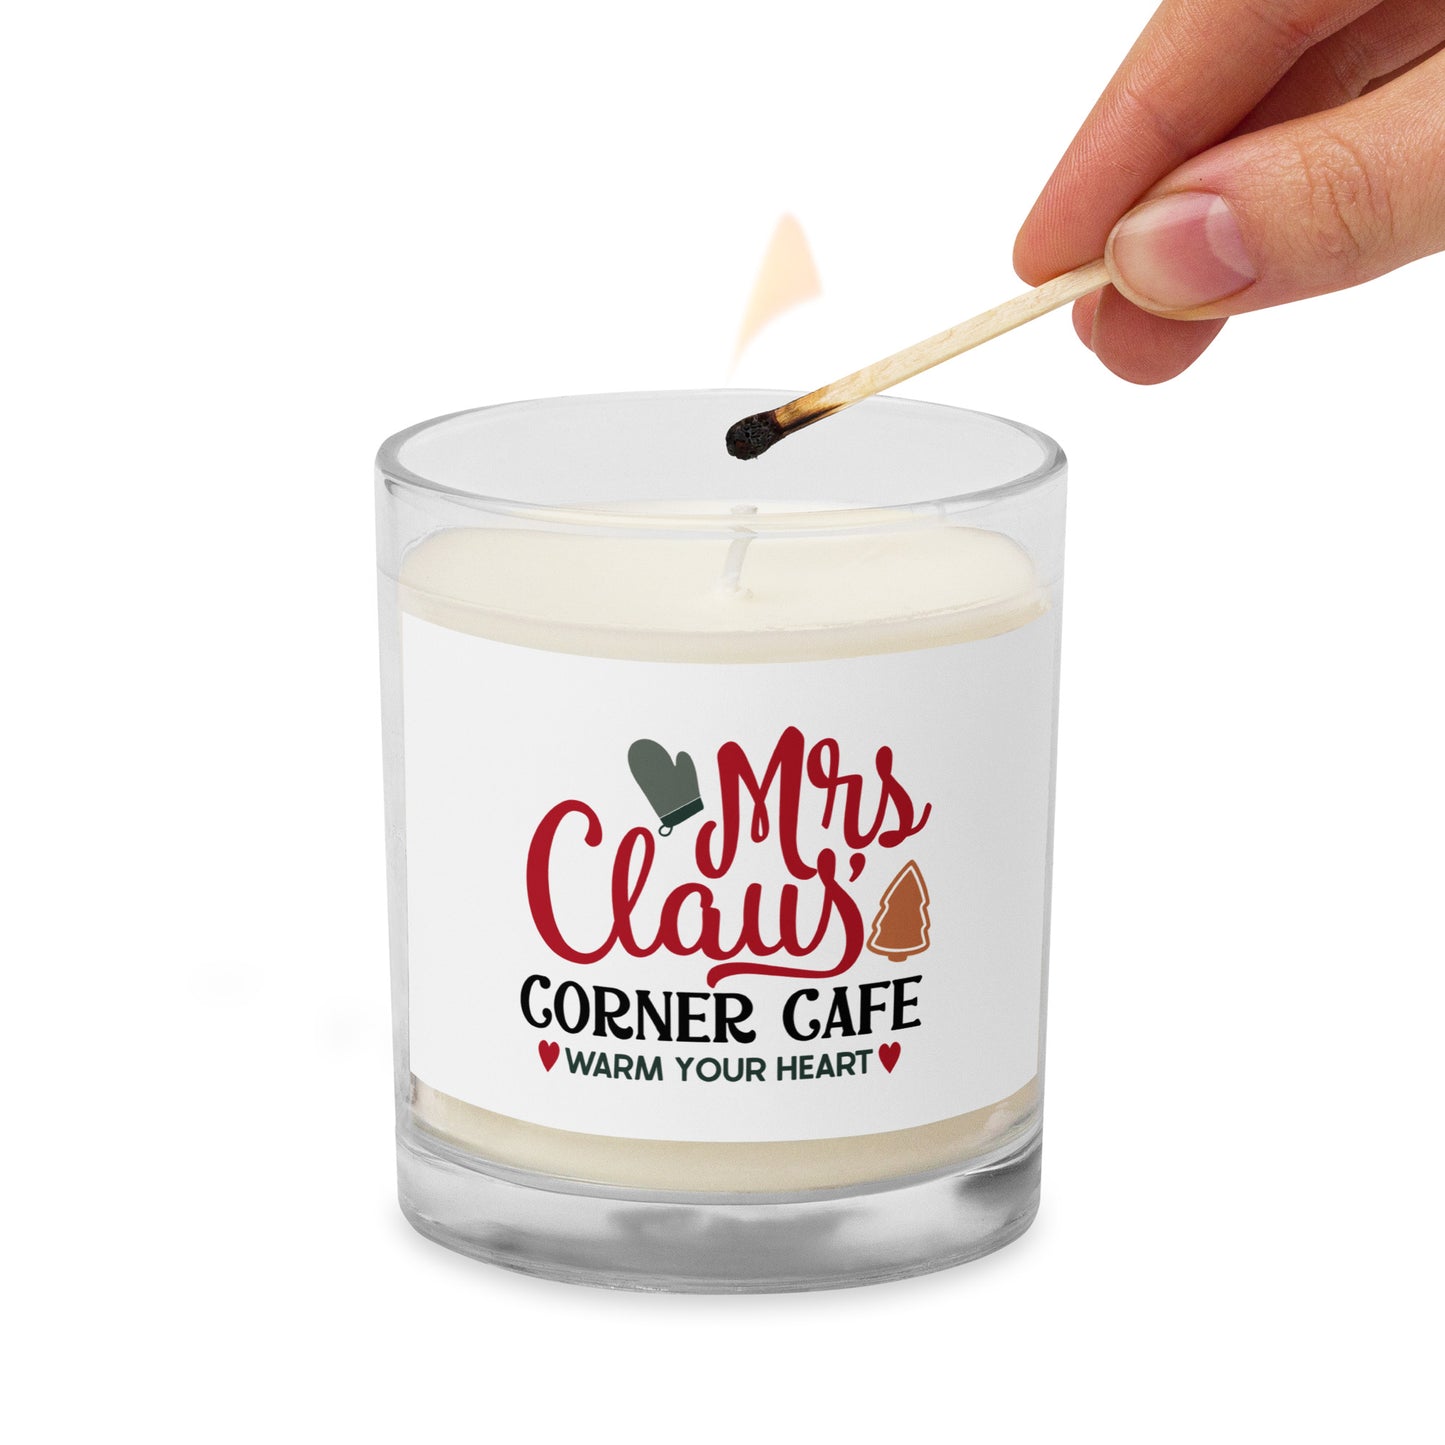 Mrs. Claus' Corner Cafe Glass Jar Soy Wax Candle